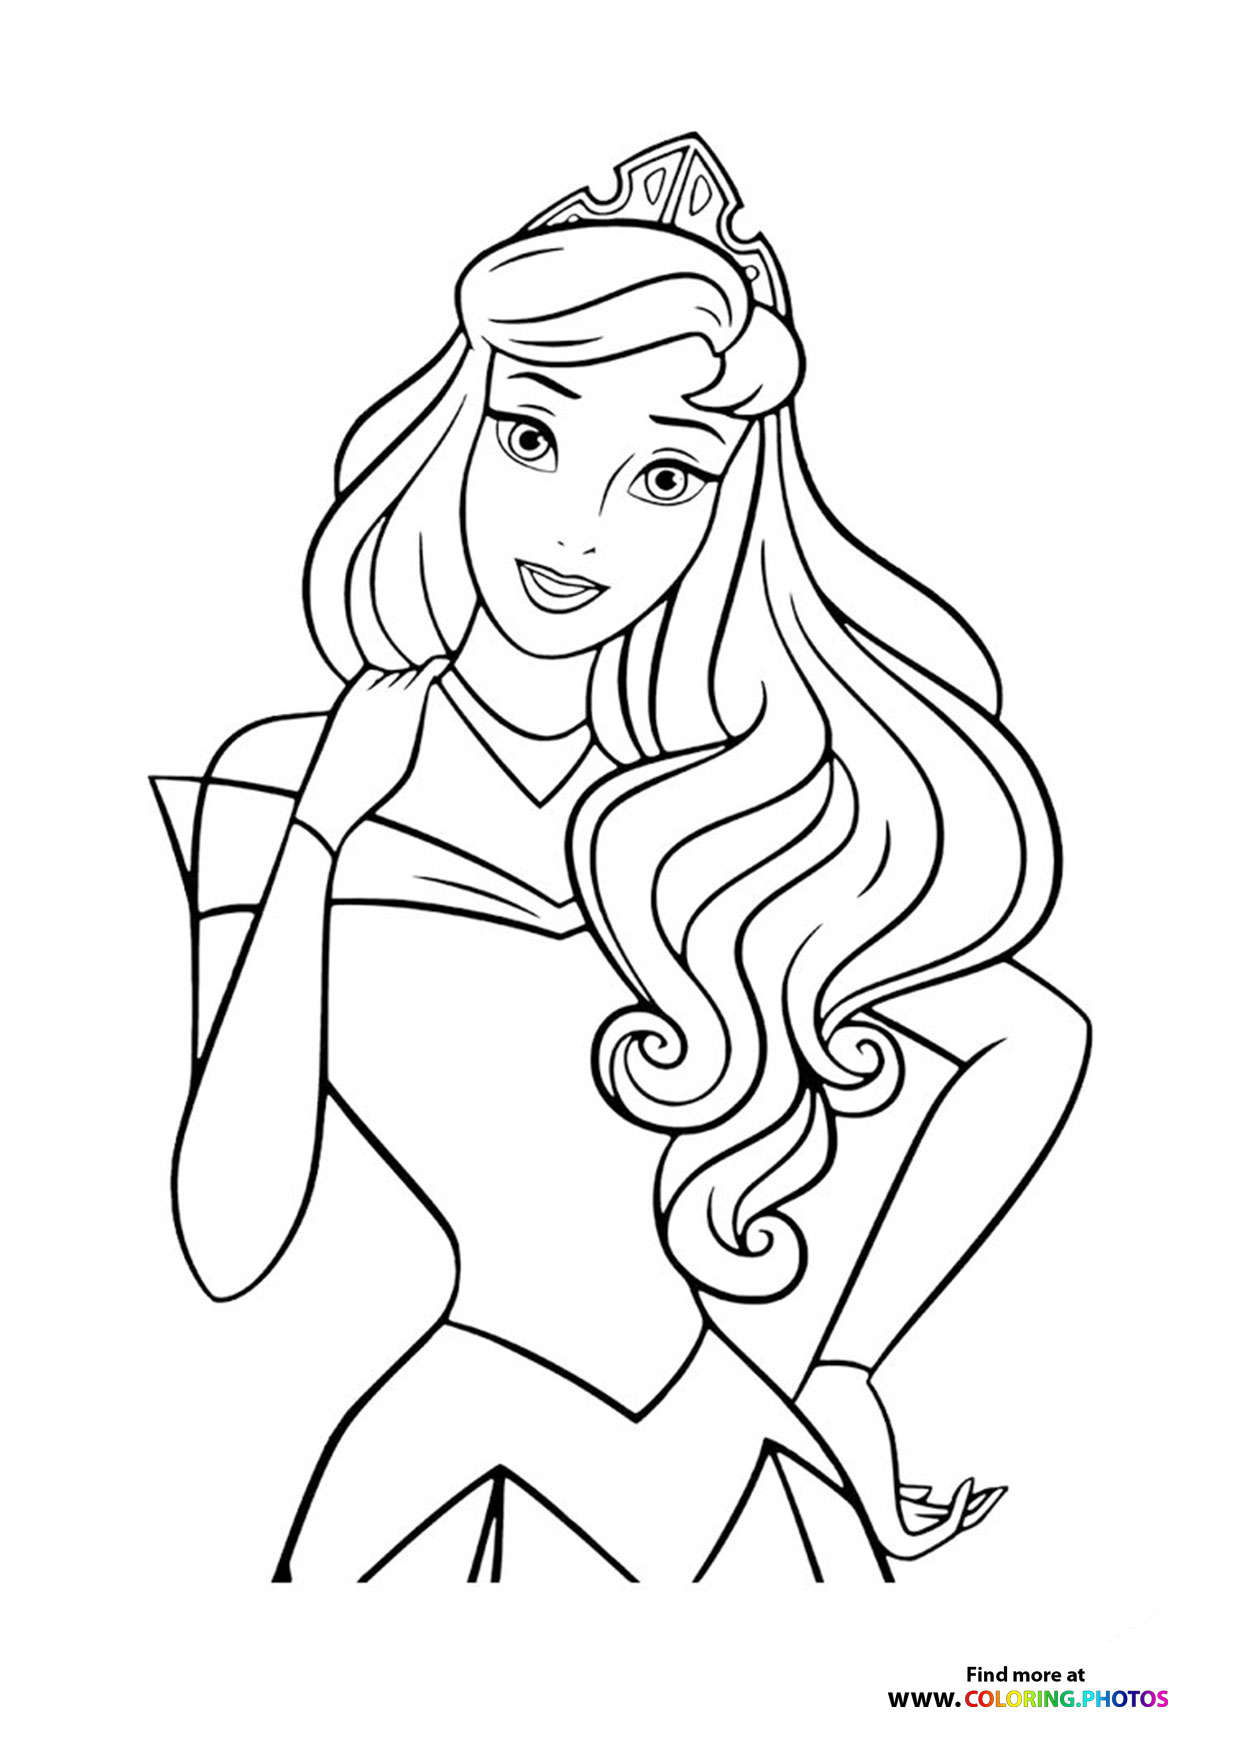 Coloring pages for girls | Fashion, unicorns, fairies and many more for ...